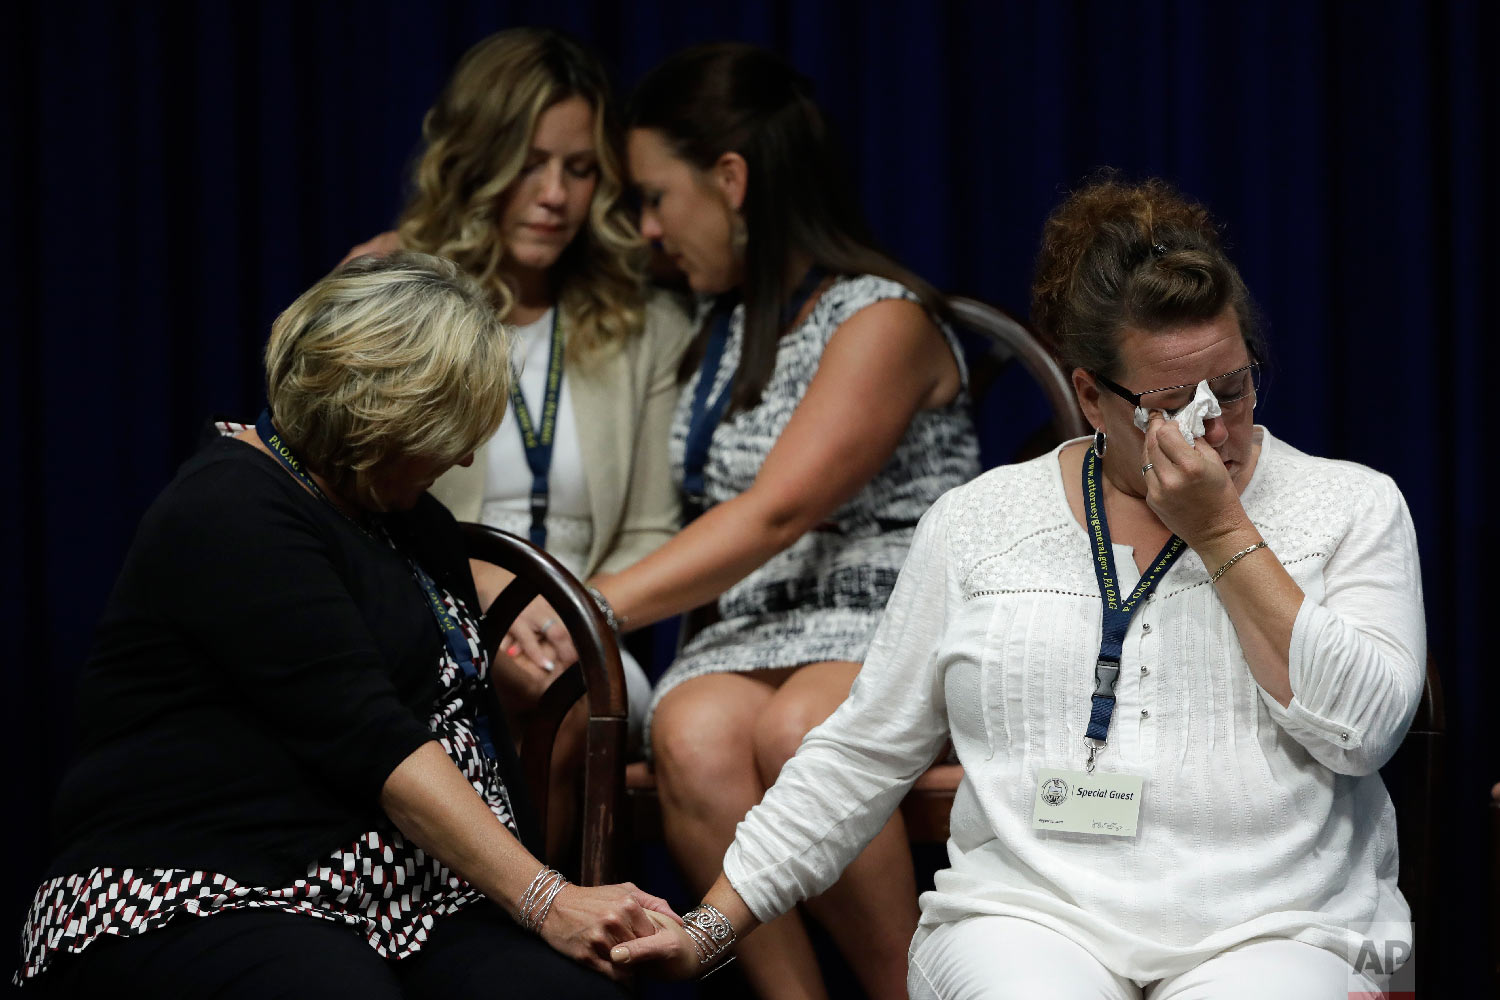  Victims of clergy sexual abuse, or their family members, react as Pennsylvania Attorney General Josh Shapiro speaks during a news conference at the State Capitol in Harrisburg, Pa., on Aug. 14, 2018. A Pennsylvania grand jury says its investigation 